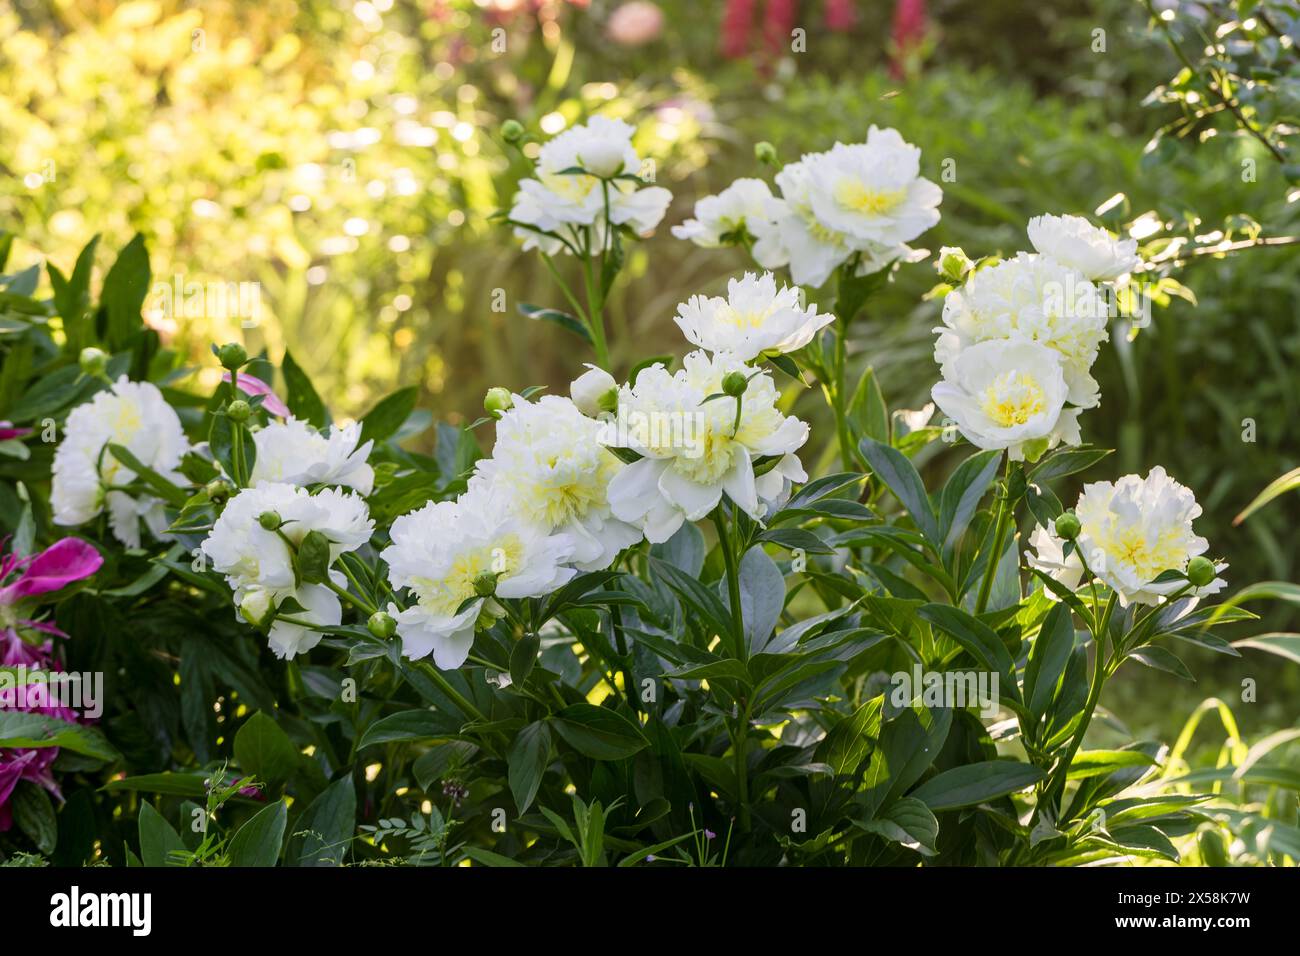 Blooming bush of bomb-shaped white and yellow peonies in the garden. High quality photo Stock Photo